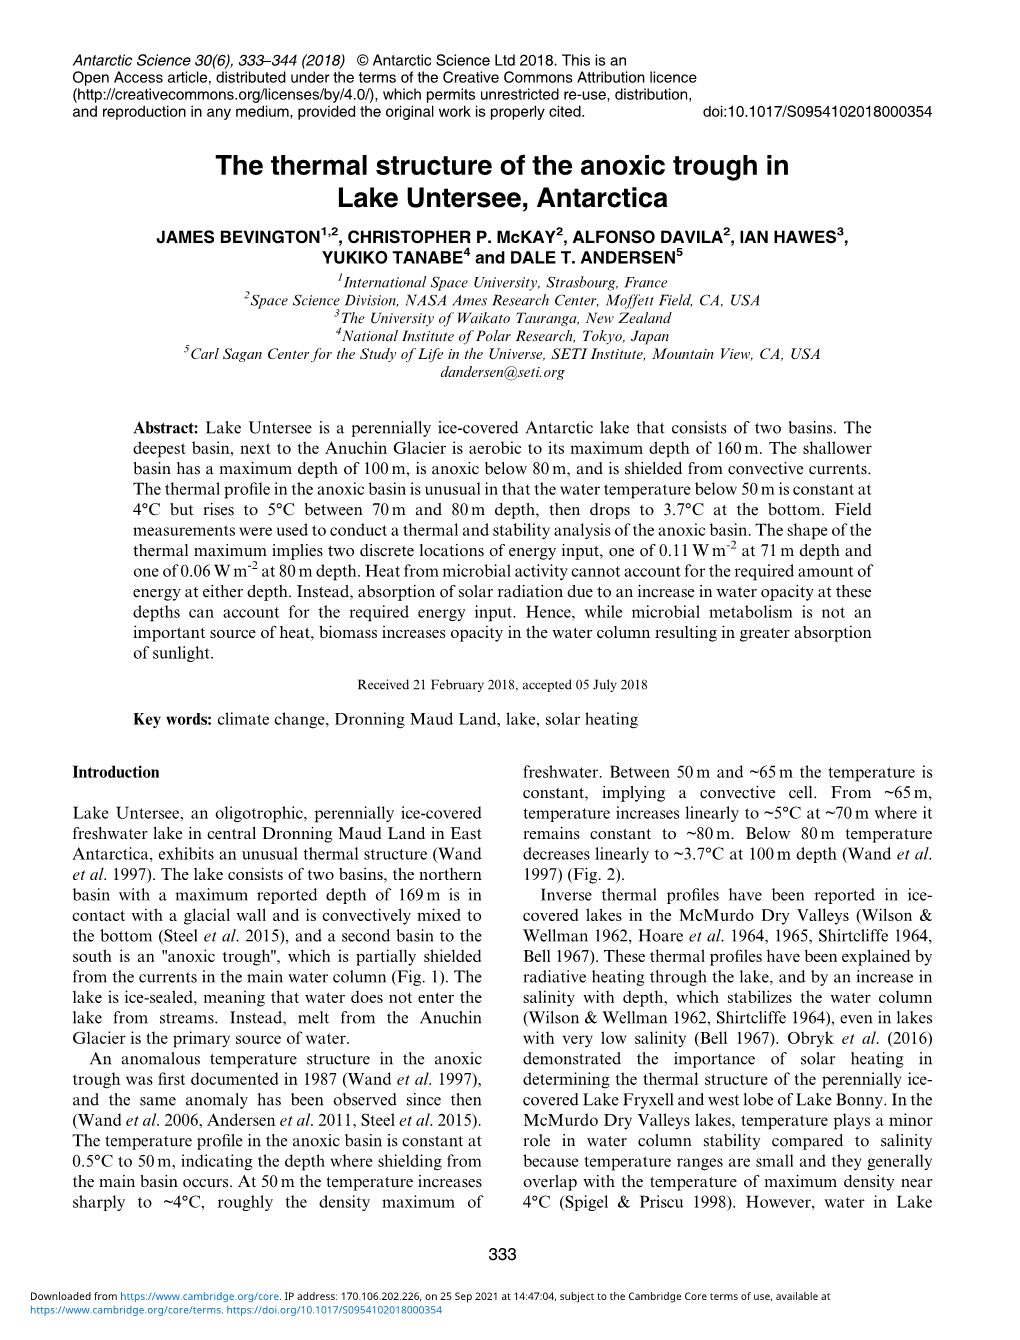 The Thermal Structure of the Anoxic Trough in Lake Untersee, Antarctica JAMES BEVINGTON1,2, CHRISTOPHER P